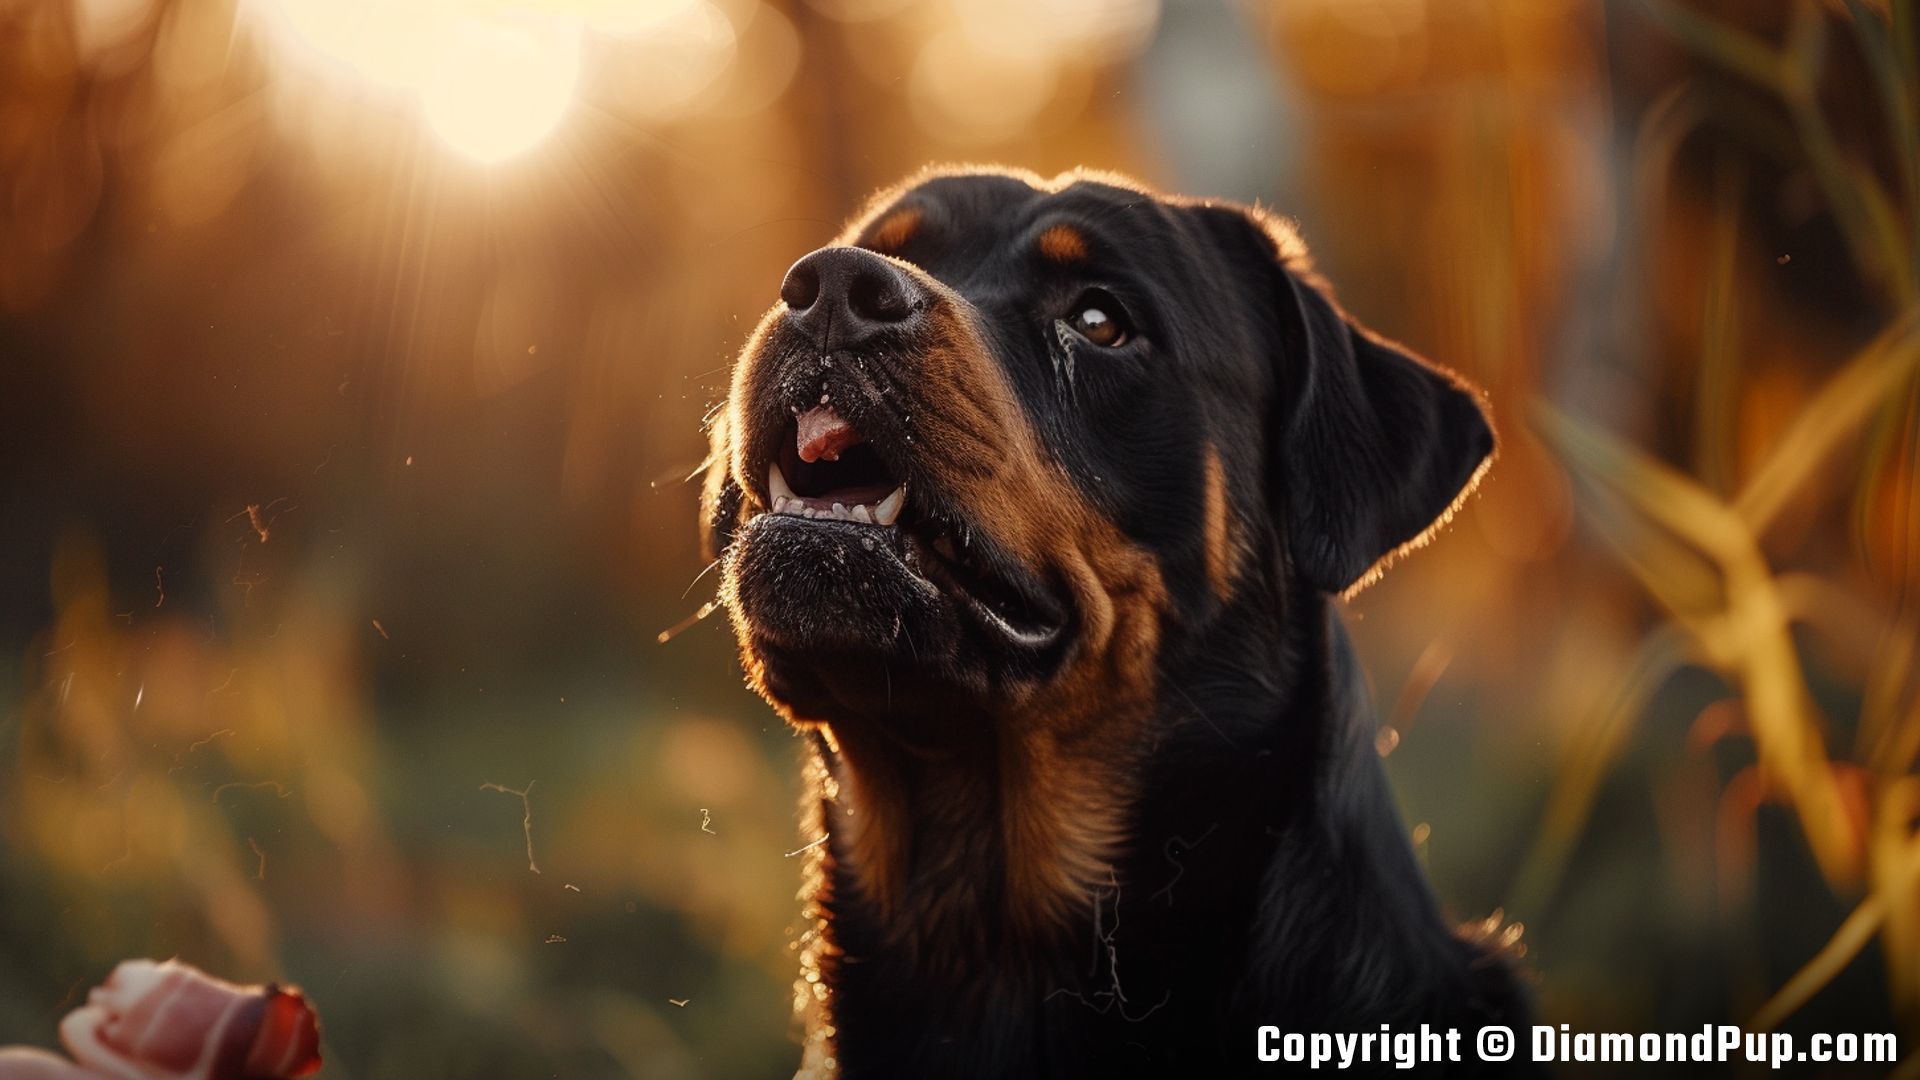 Photograph of a Cute Rottweiler Snacking on Bacon